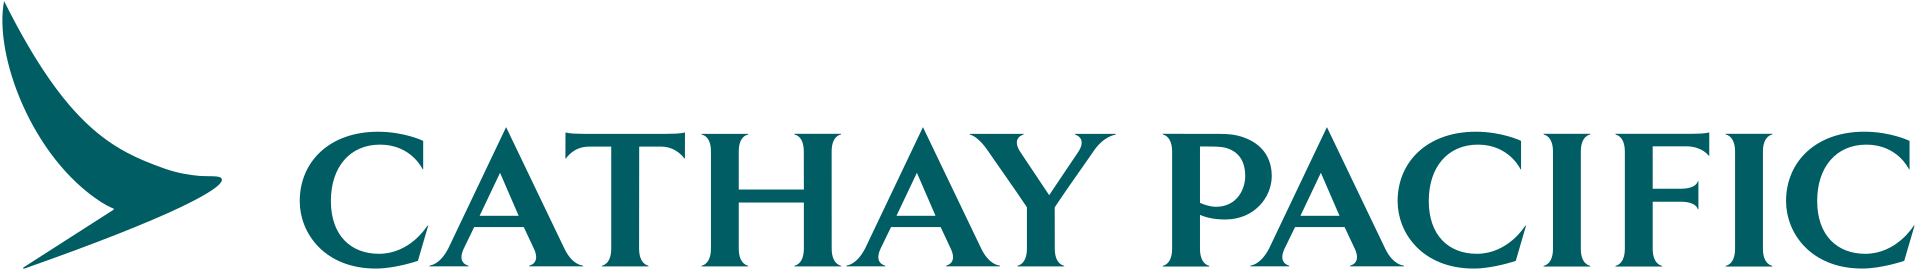 Cathay_Pacific_Ltd._logo.svg.png